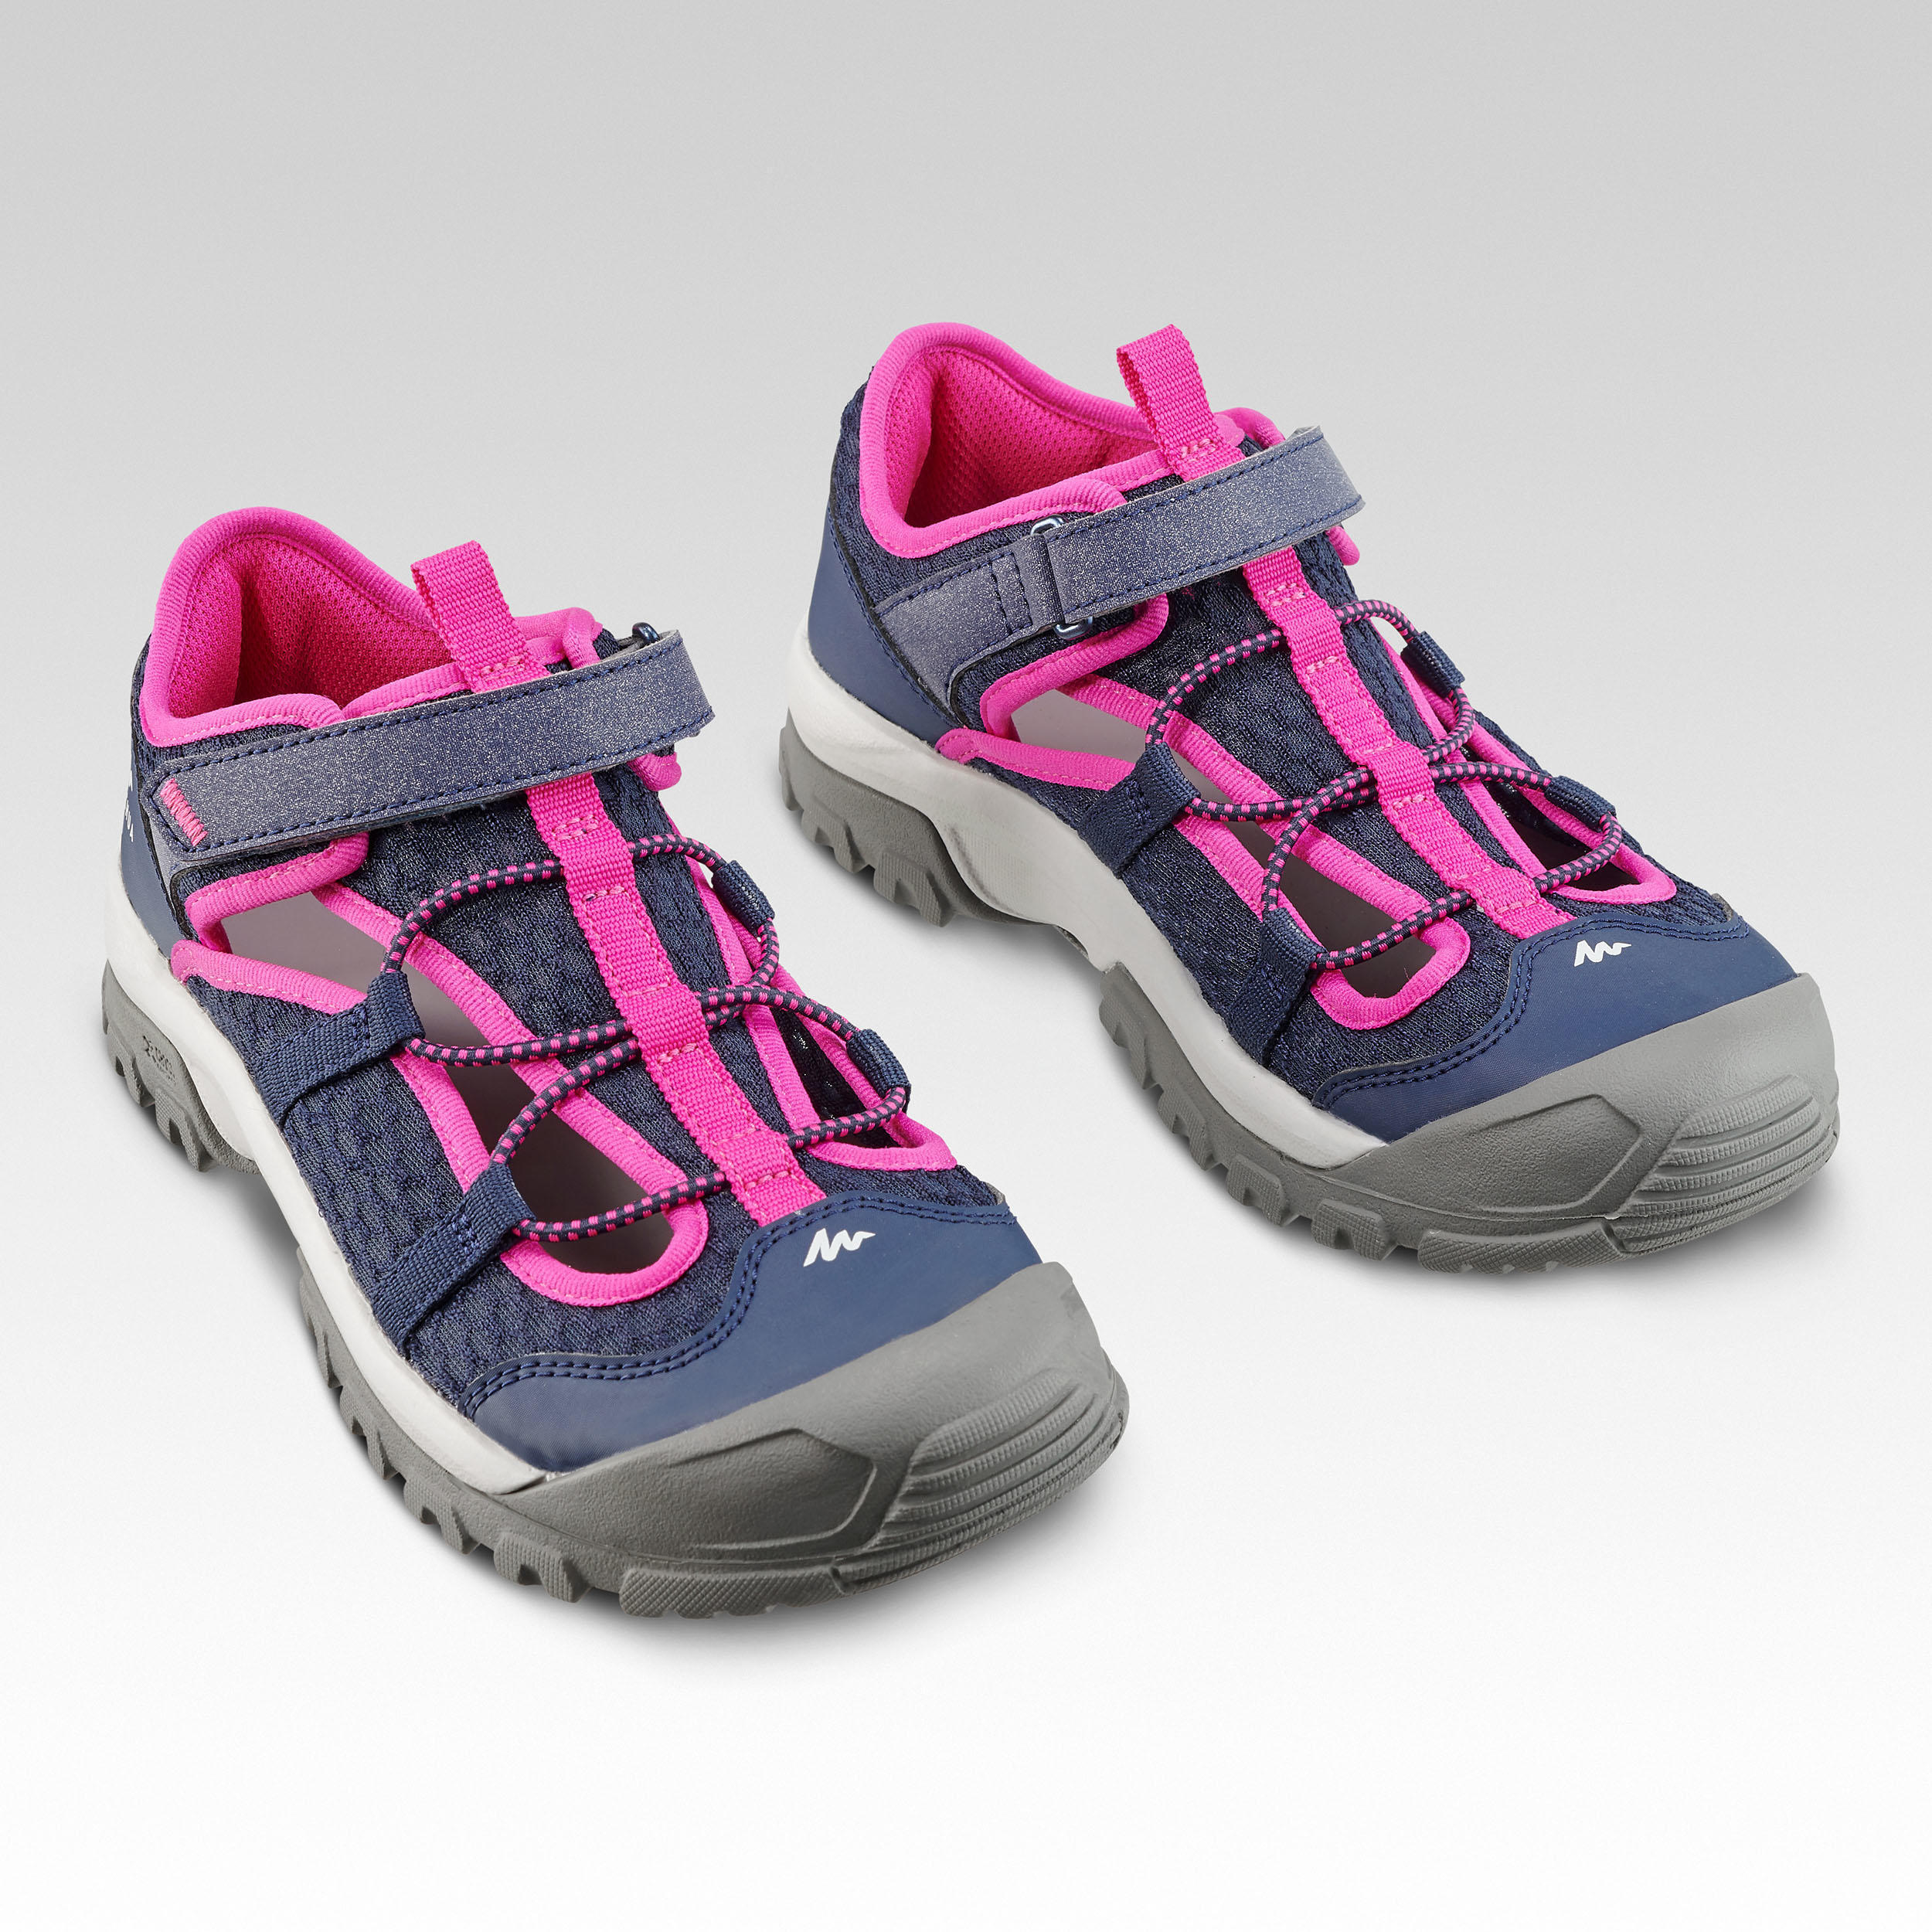 Children's hiking sandals MH150 TW blue pink - JR size 10 TO 6 4/6